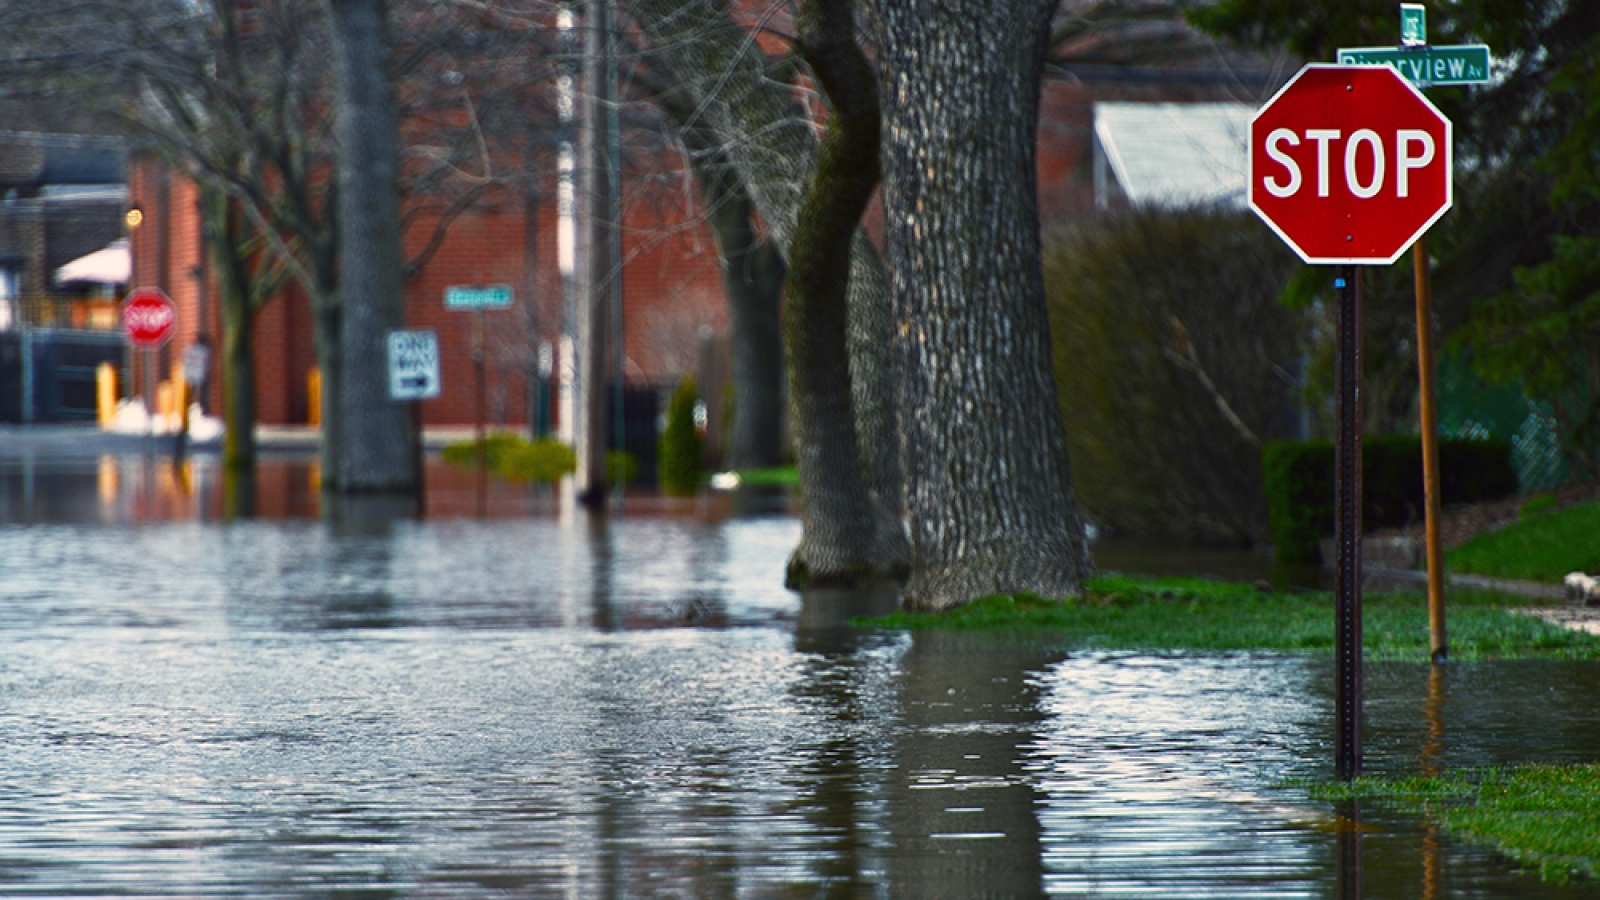 a flooded street with a stop sign in the foreground